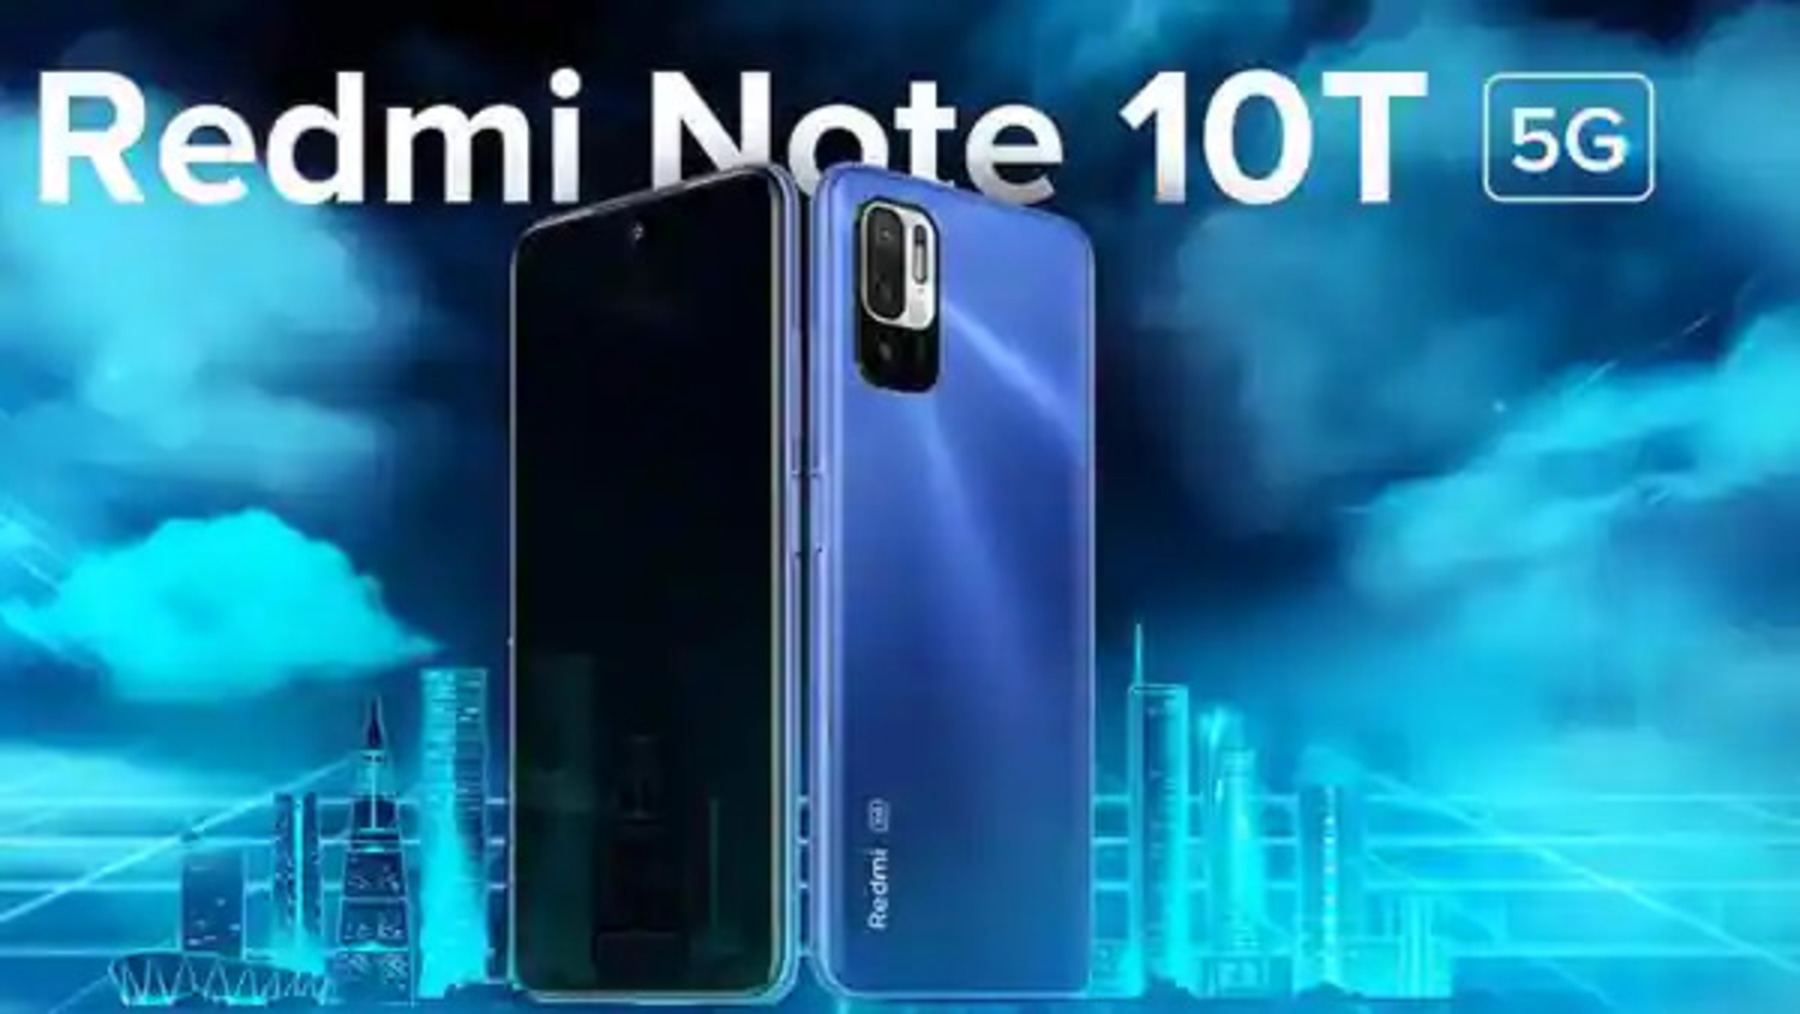 Redmi Note 10T launches in India, know specification and price